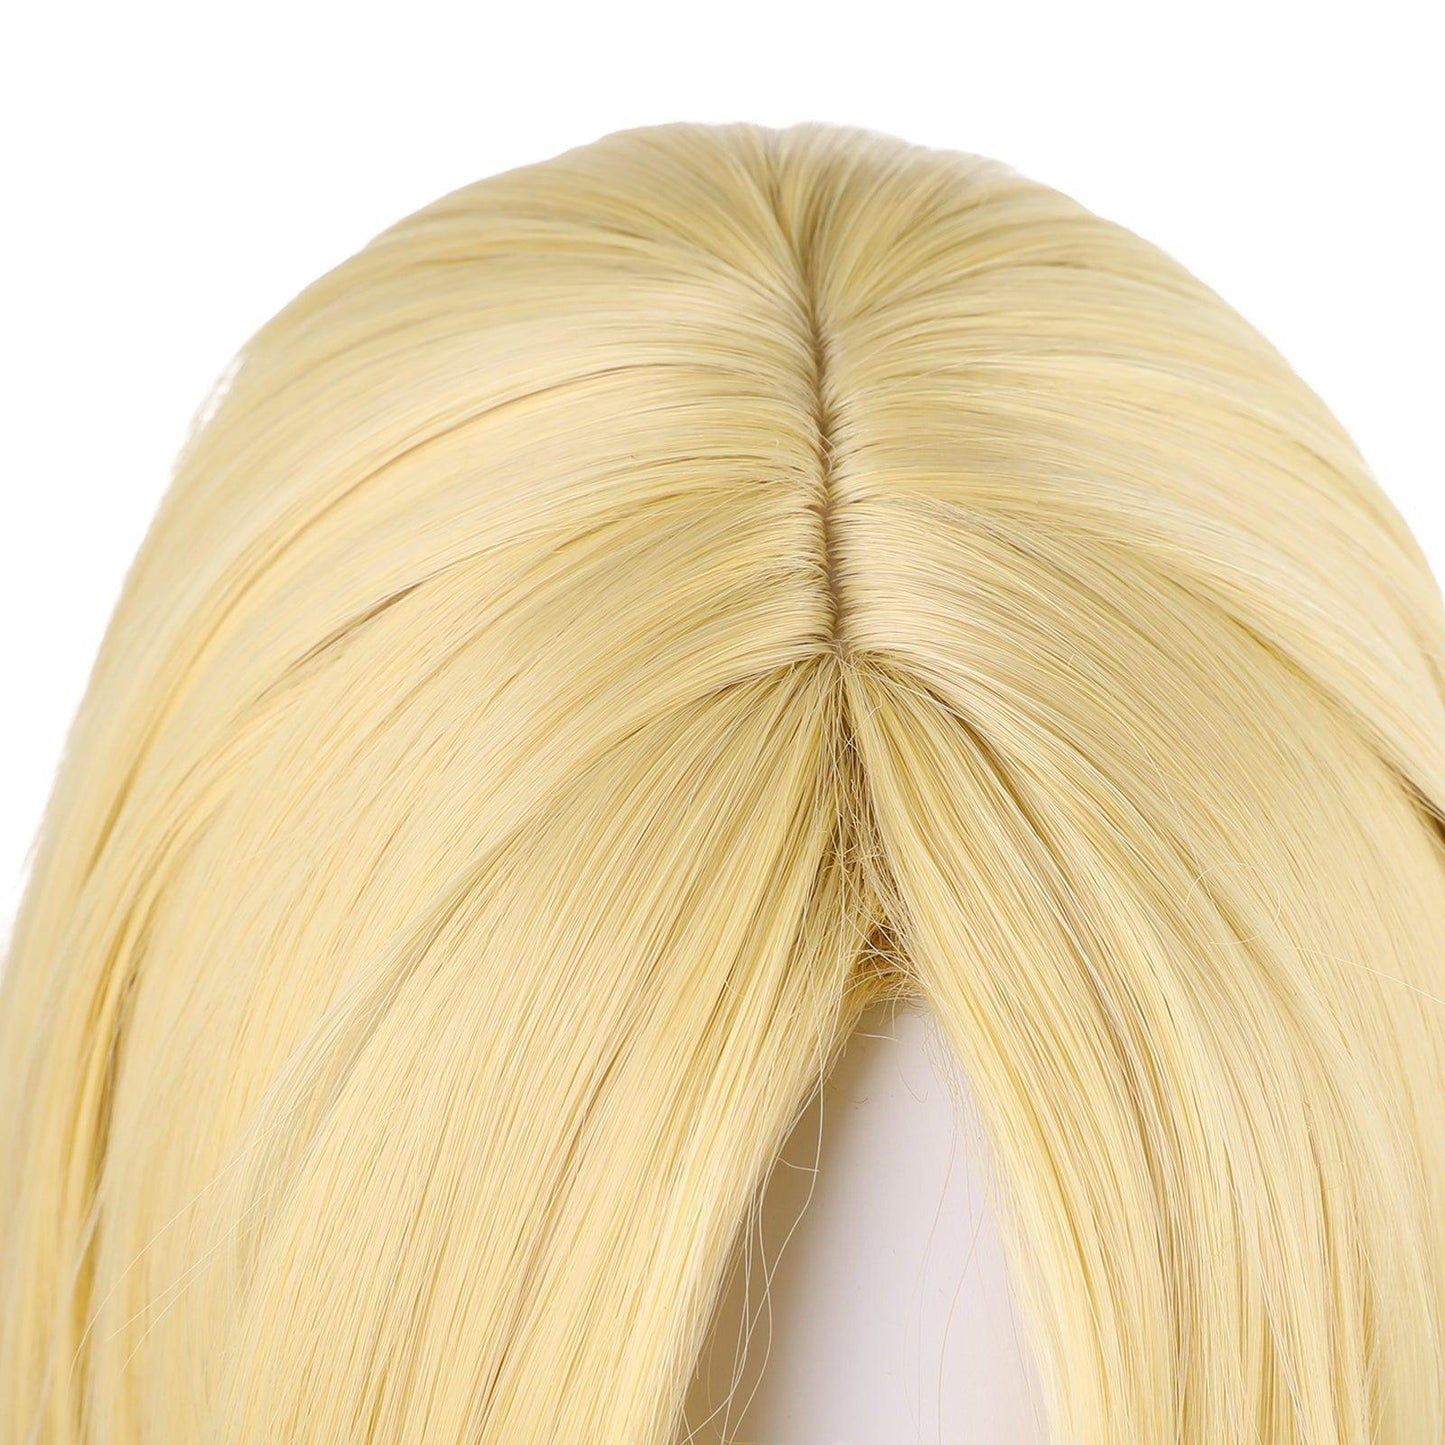 coscrew anime filo yellow cosplay wig of the rising of the shield hero 538c